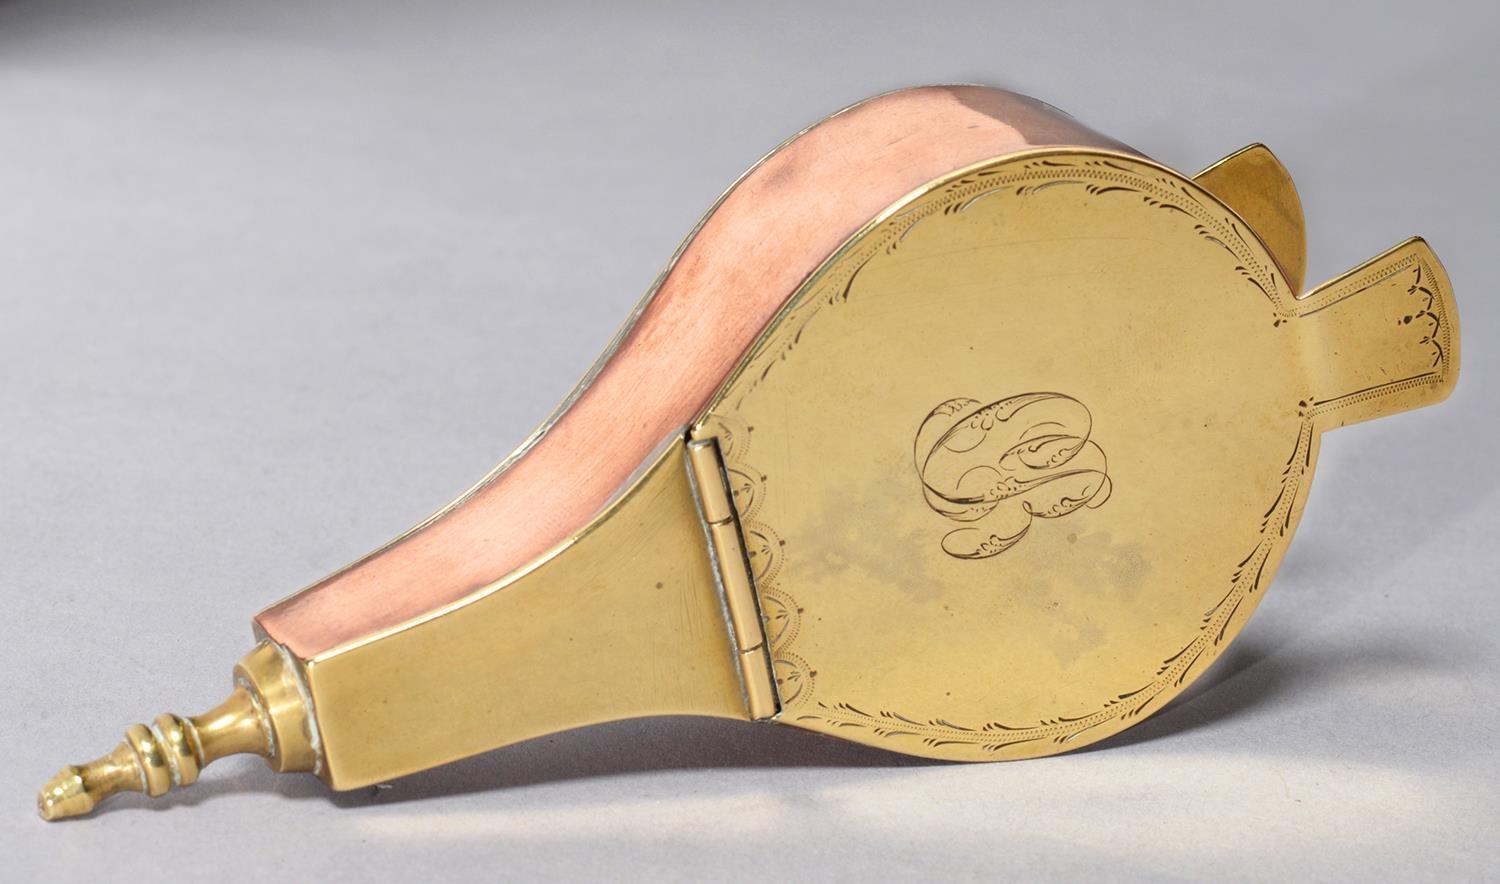 AN ENGLISH COPPER AND BRASS BELLOWS NOVELTY SNUFF BOX, EARLY 19TH C, THE LID ENGRAVED WITH A